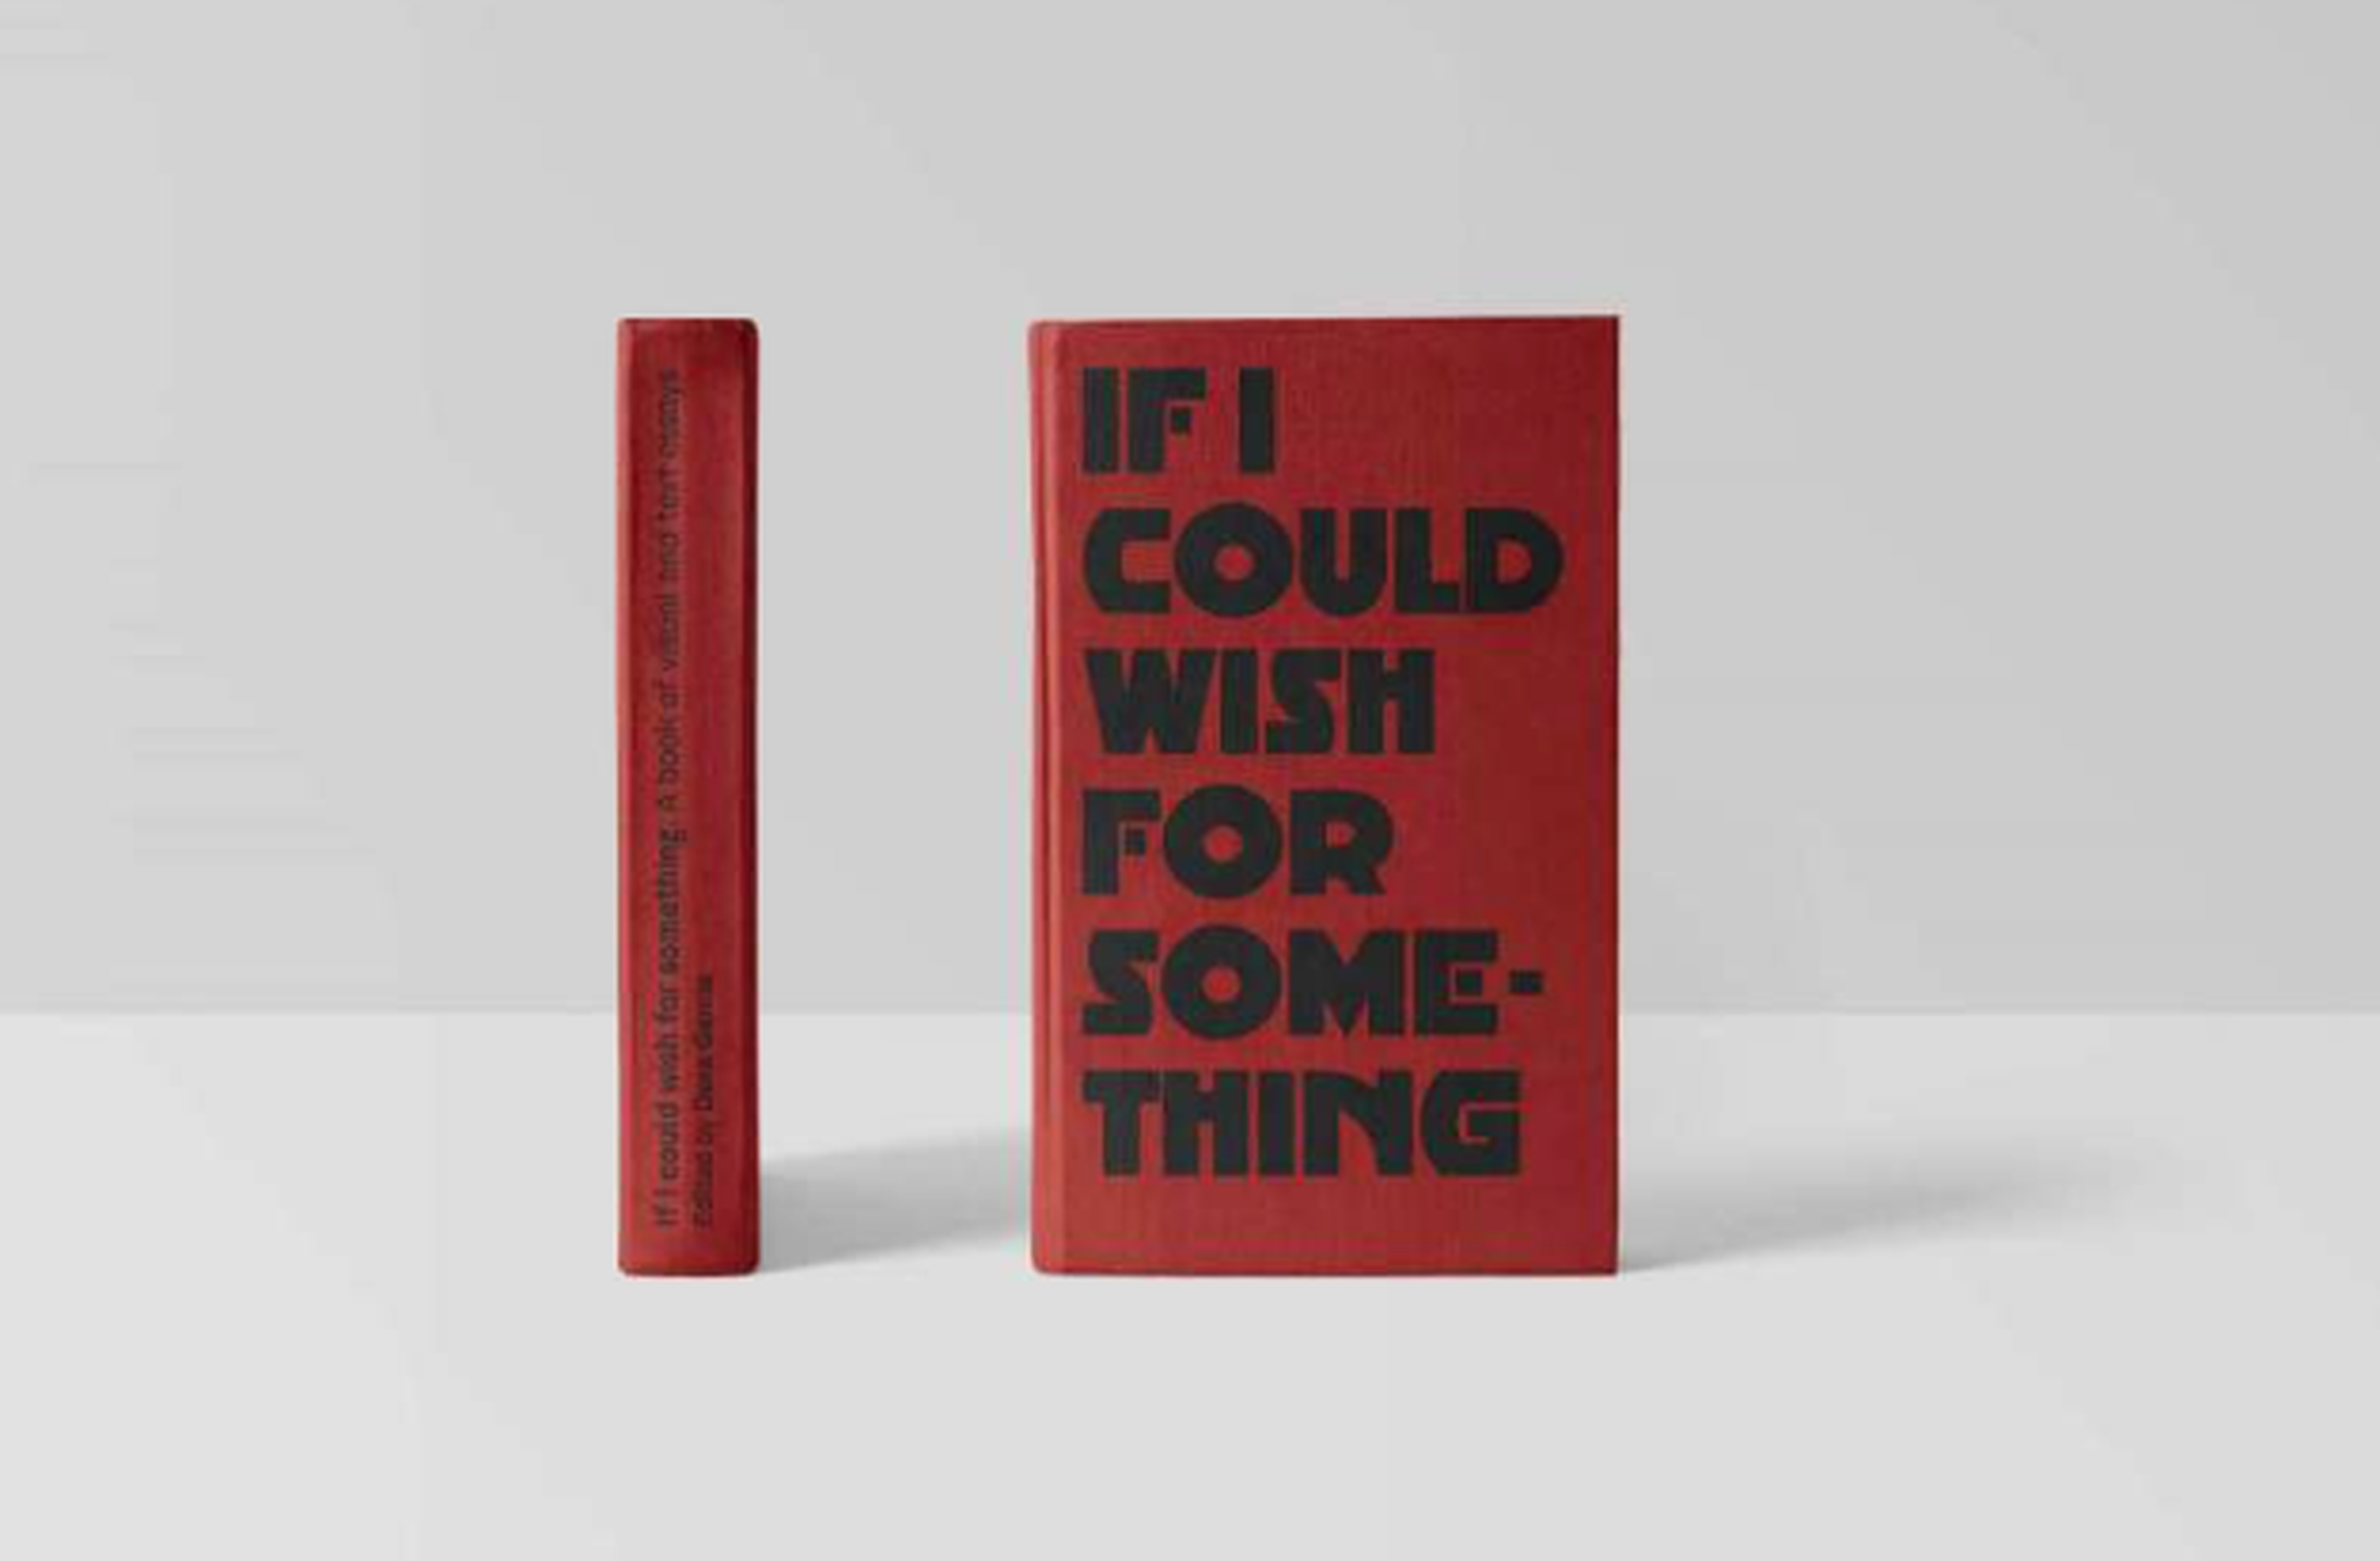 If I could wish for something